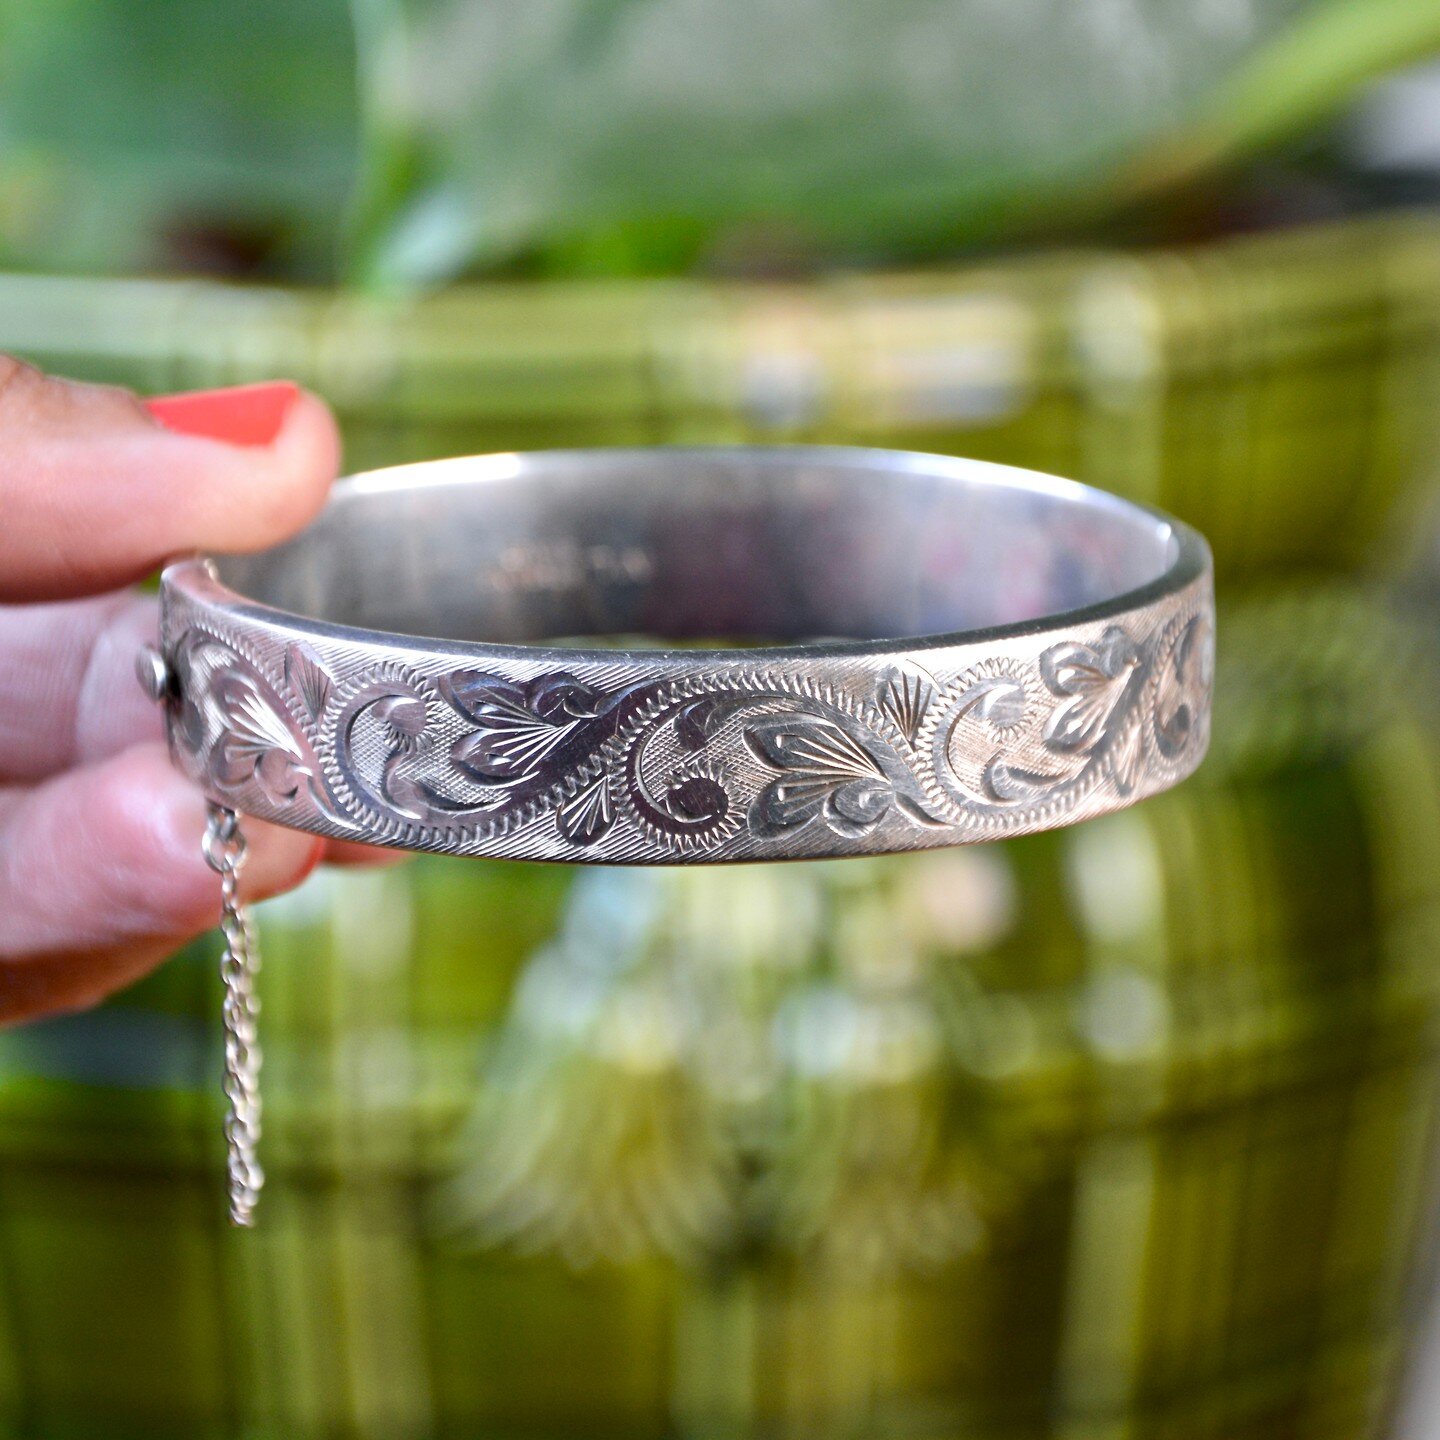 1980s sterling silver Victorian Revival bangle with etched flourishes and curls, and safety chain. Made in England. Fully hallmarked. 18.8g.

Pricing and more pics at abriefhistoryvintage.com/jewellery &amp; www.etsy.com/ie/shop/ABriefHistoryVintage.